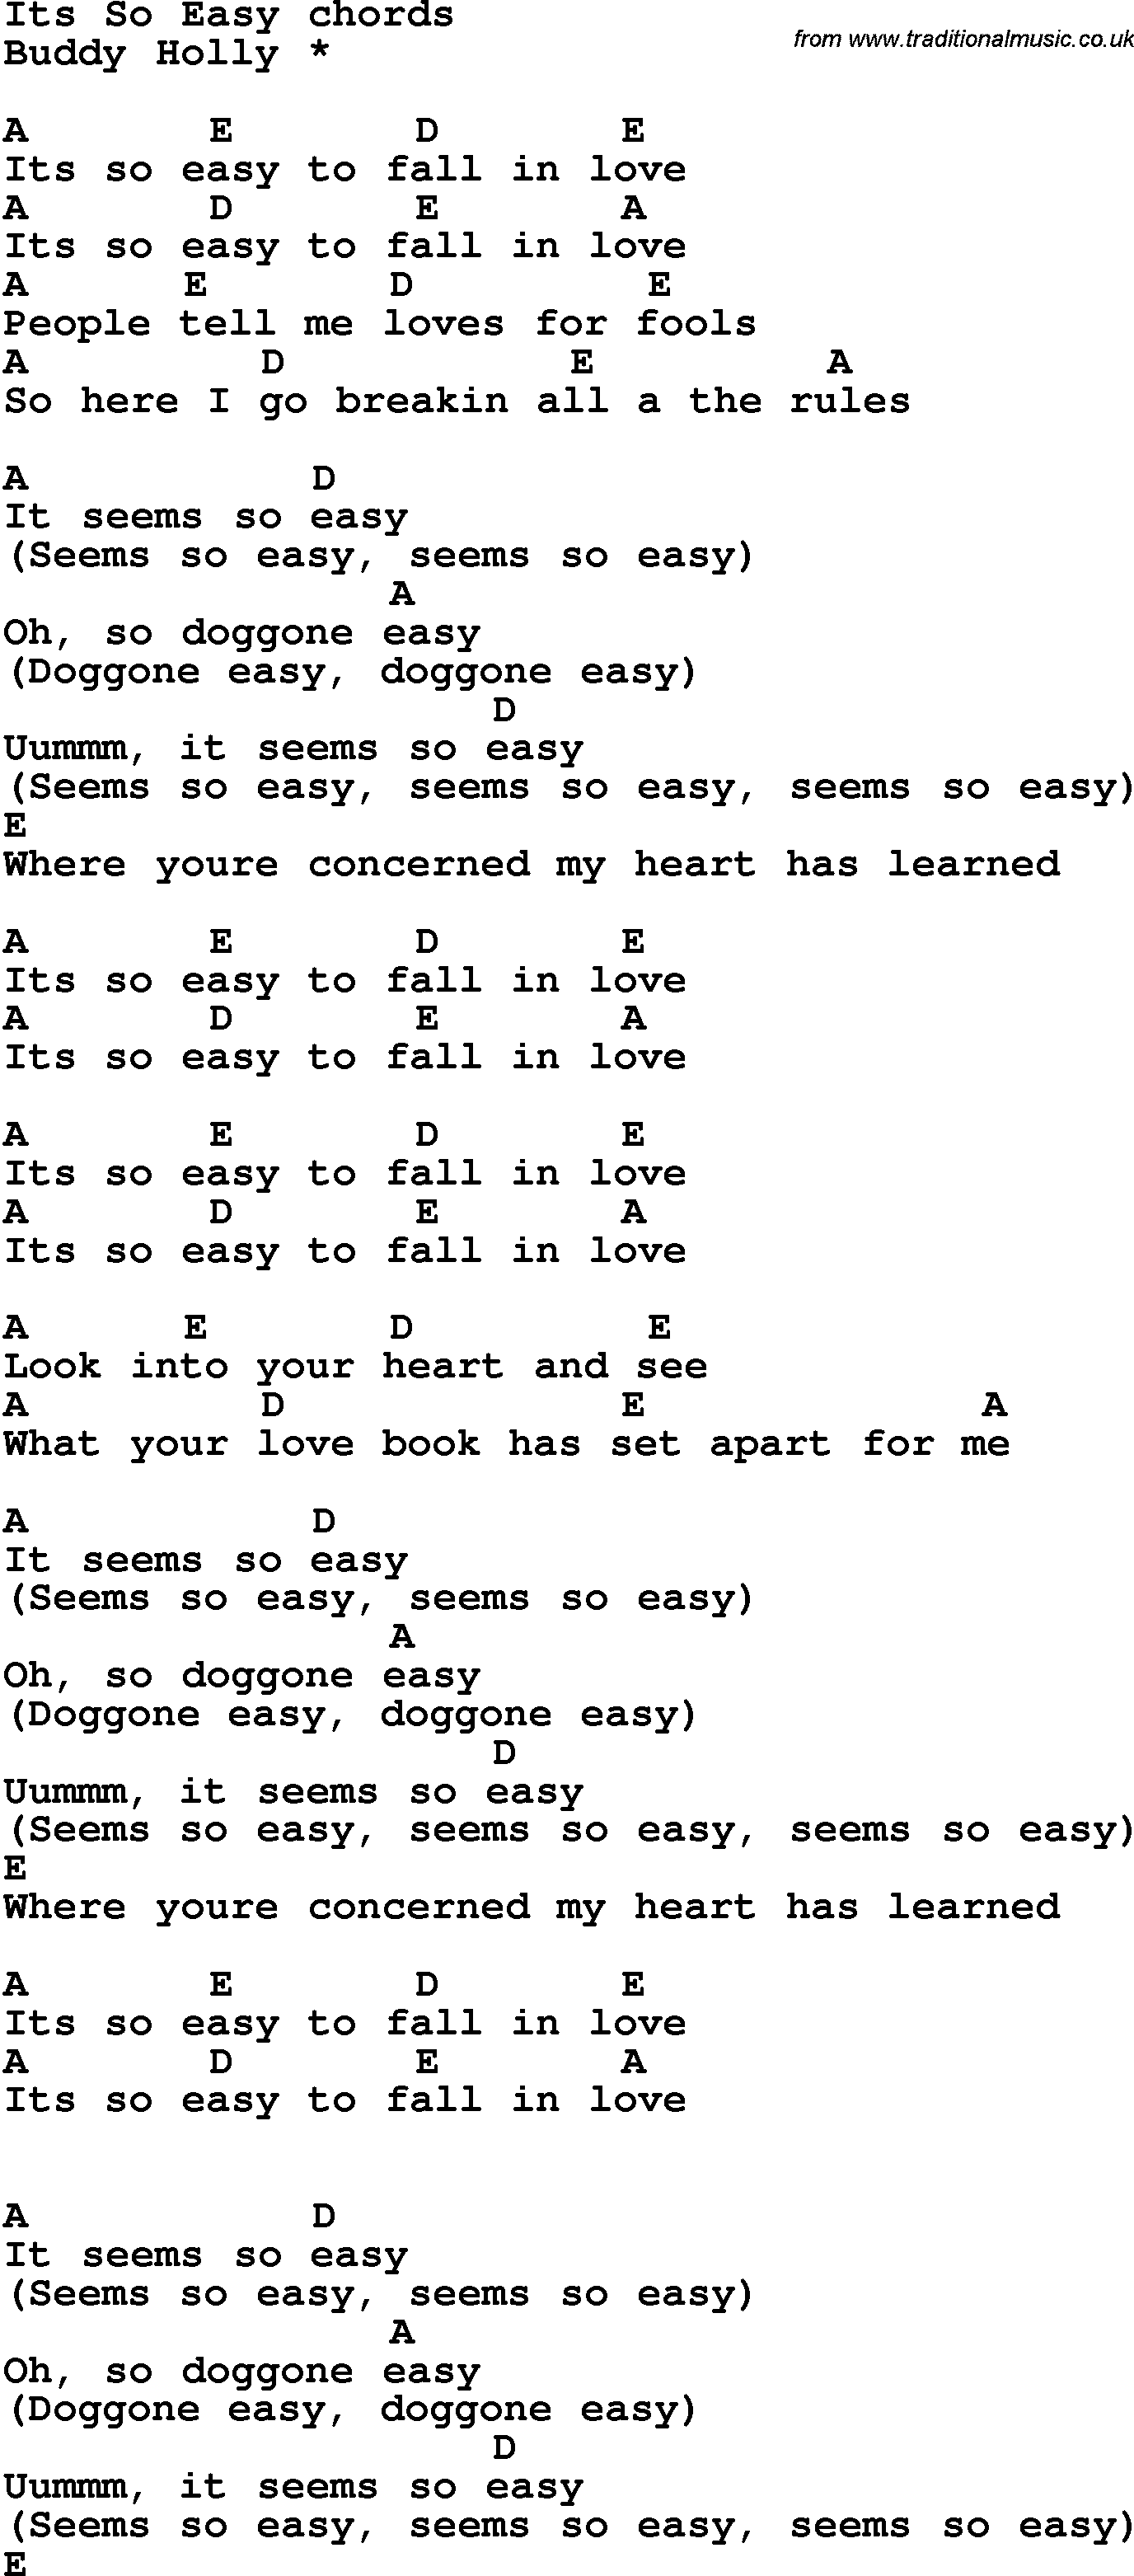 Song Lyrics with guitar chords for It's So Easy